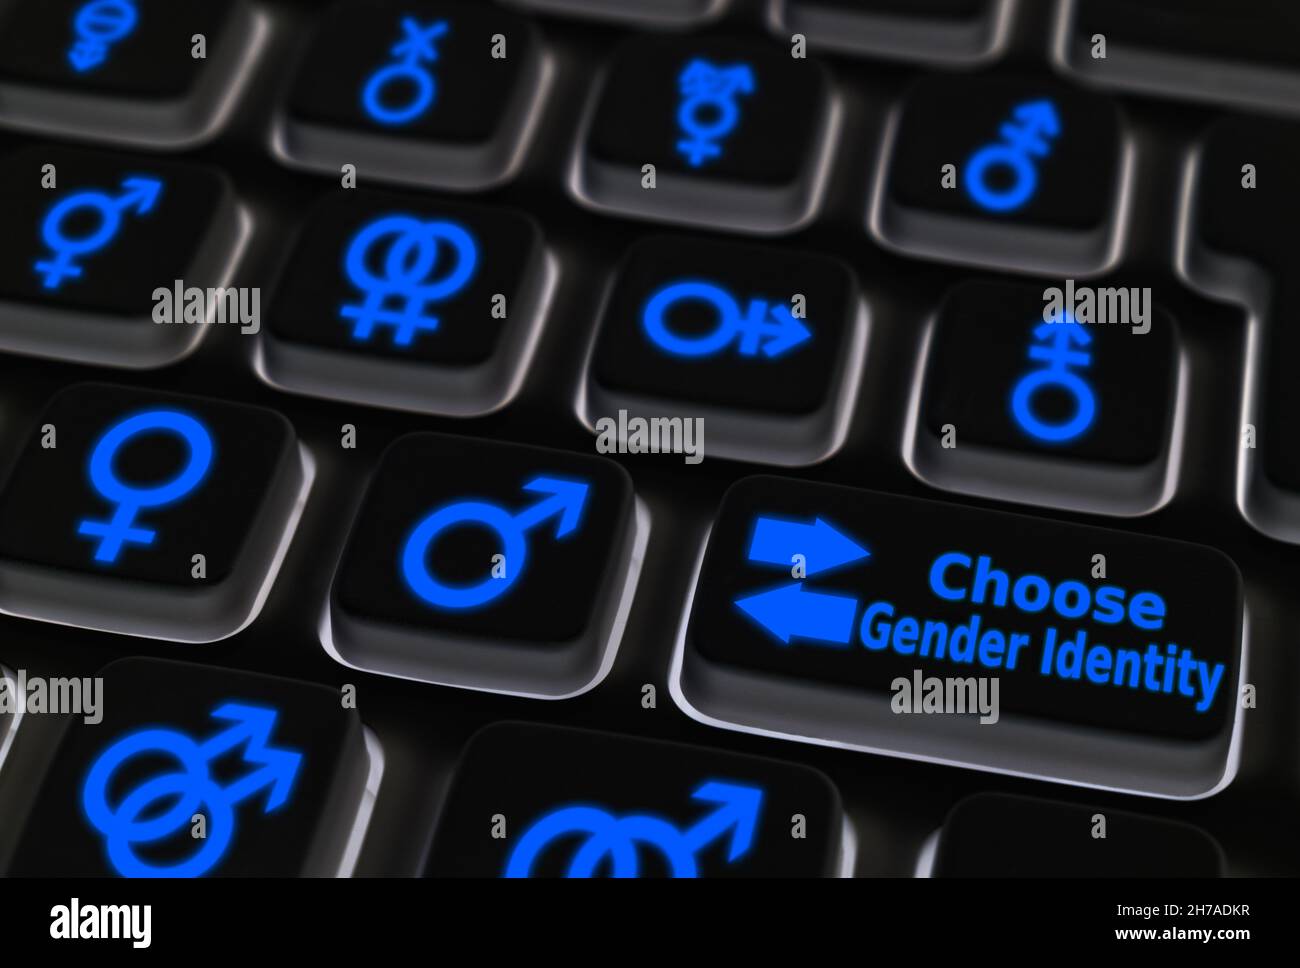 Buttons on a computer keyboard for selecting or choosing your gender identity. Stock Photo